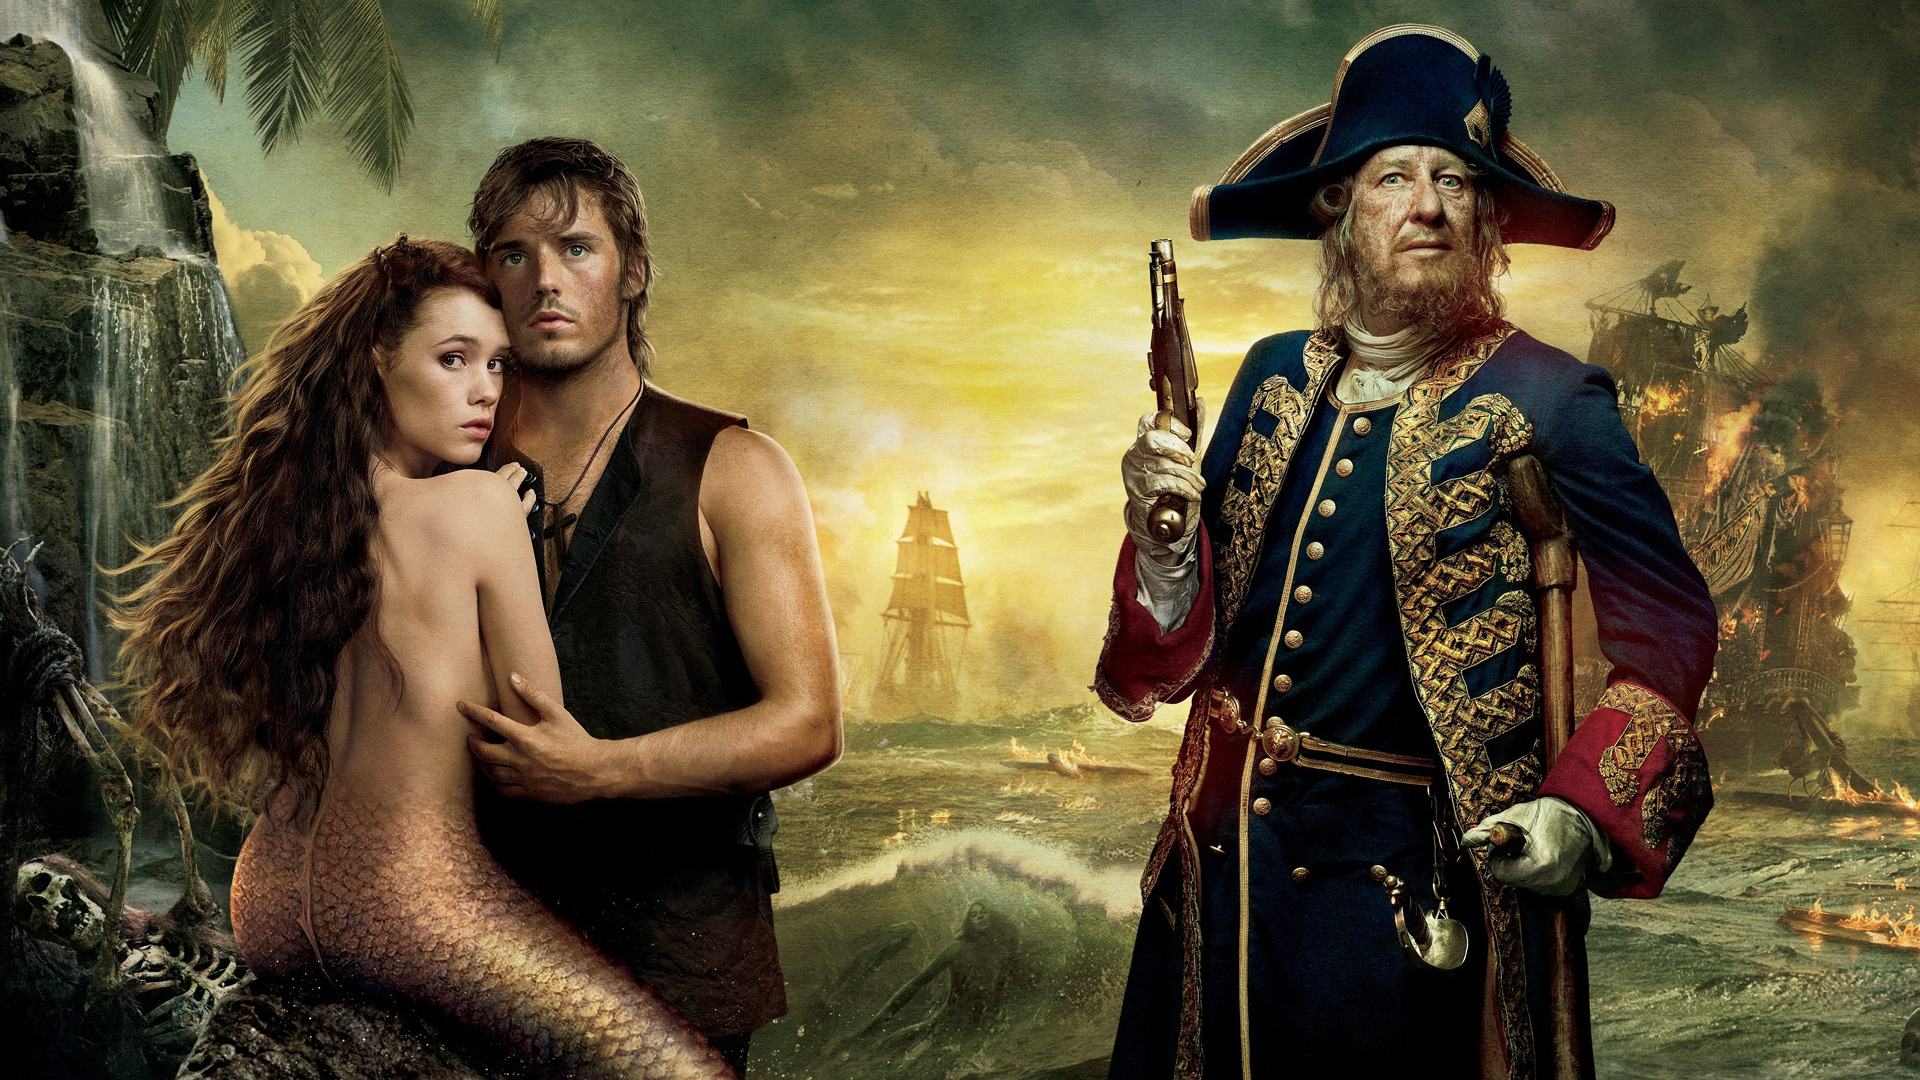 Hector Barbossa Geoffrey Rush Astrid Berges Frisbey Sam Claflin Philip Pirates Of The Caribbean Syre 1920x1080